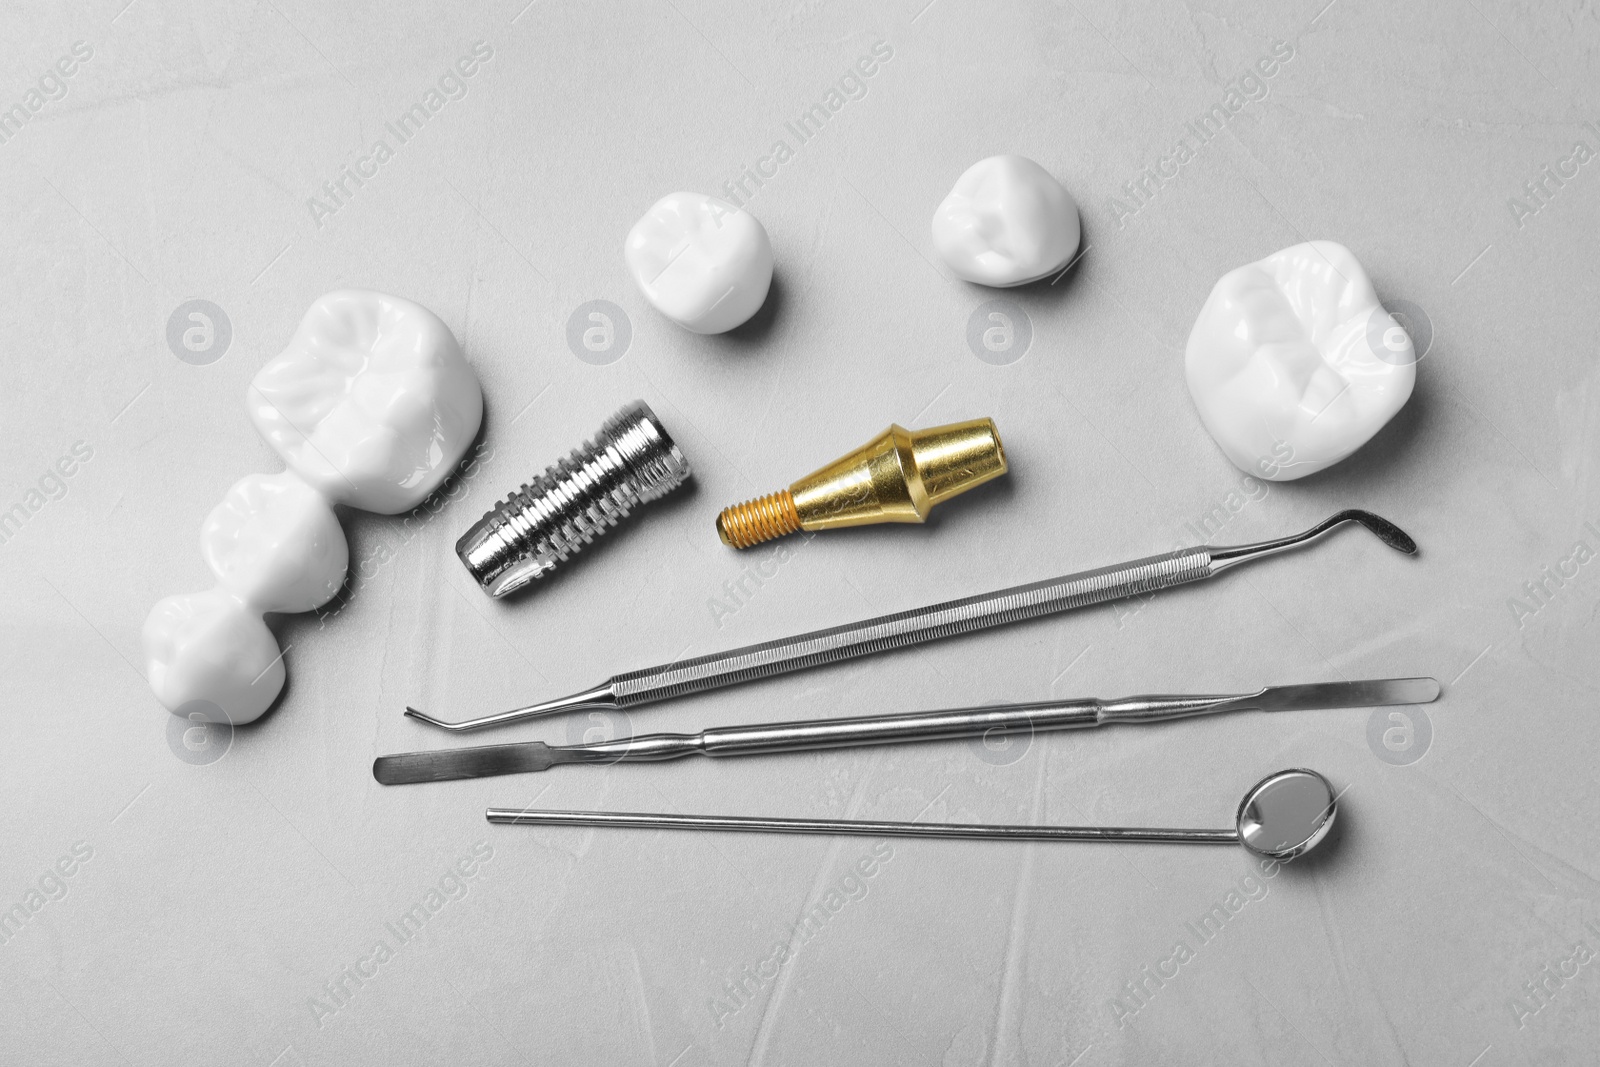 Photo of Post, abutment and different crowns of dental implant near medical tools on grey table, flat lay